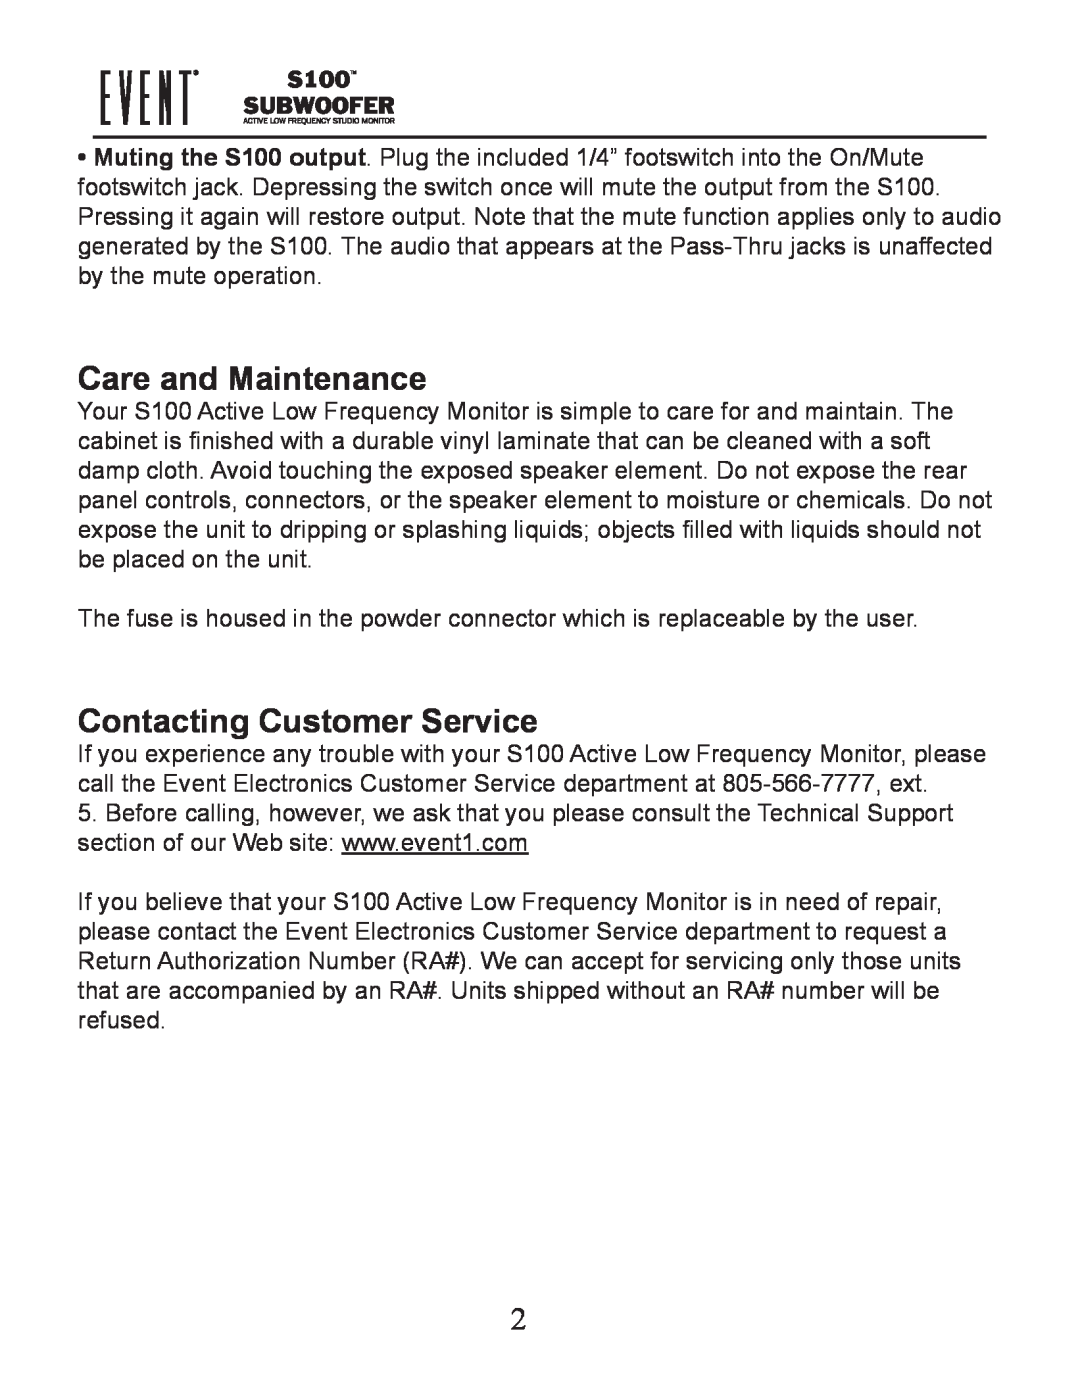 Event electronic S100 manual Care and Maintenance, Contacting Customer Service 